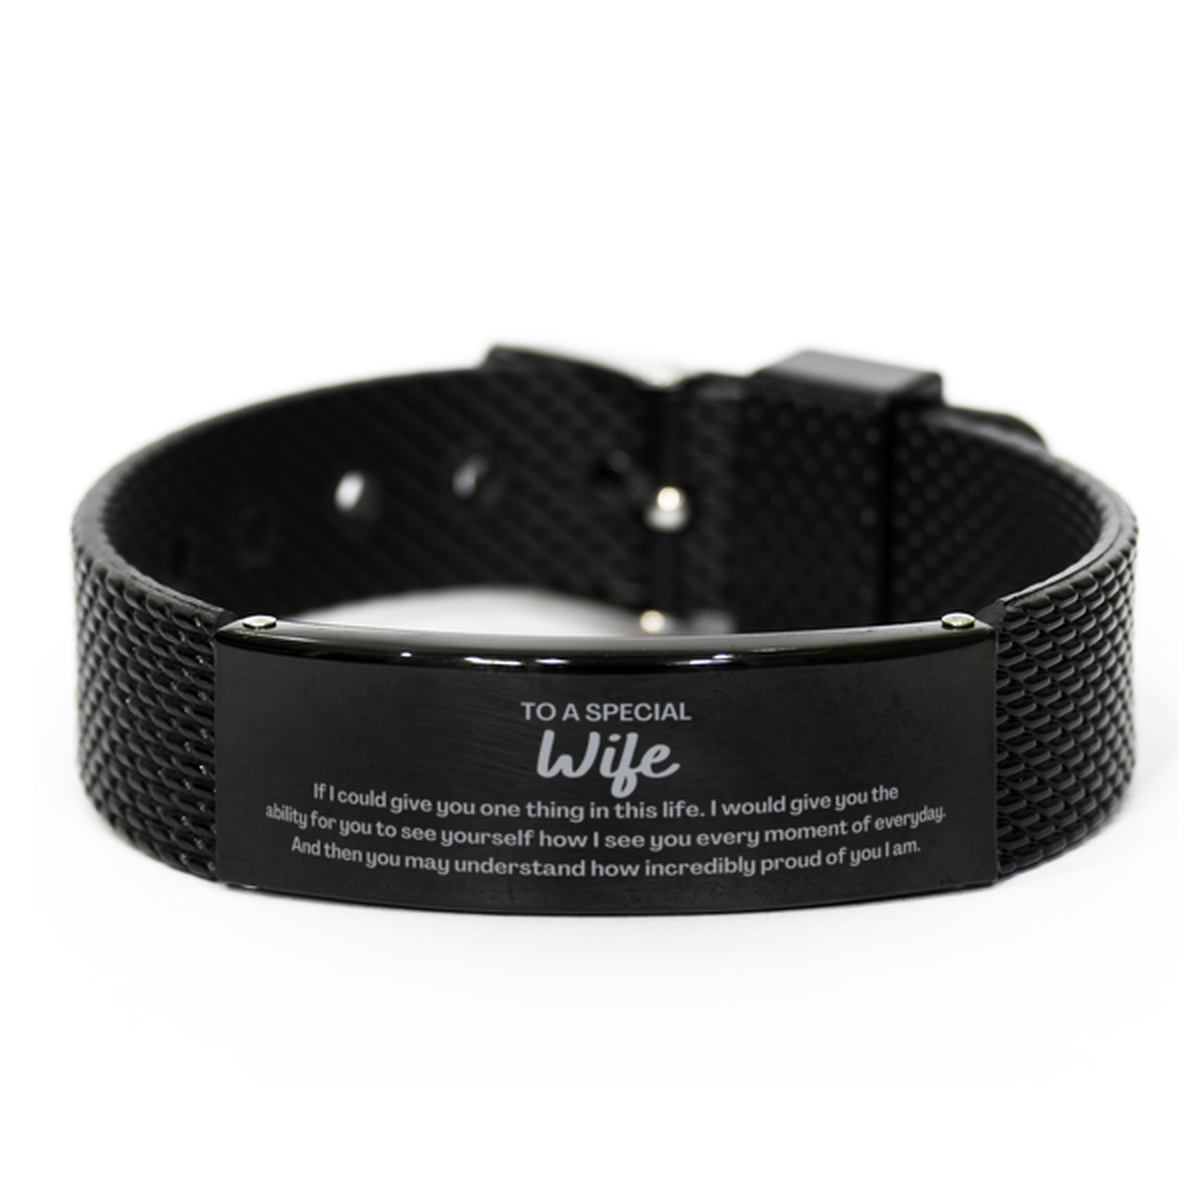 To My Wife Black Shark Mesh Bracelet, Gifts For Wife Engraved, Inspirational Gifts for Christmas Birthday, Epic Gifts for Wife To A Special Wife how incredibly proud of you I am